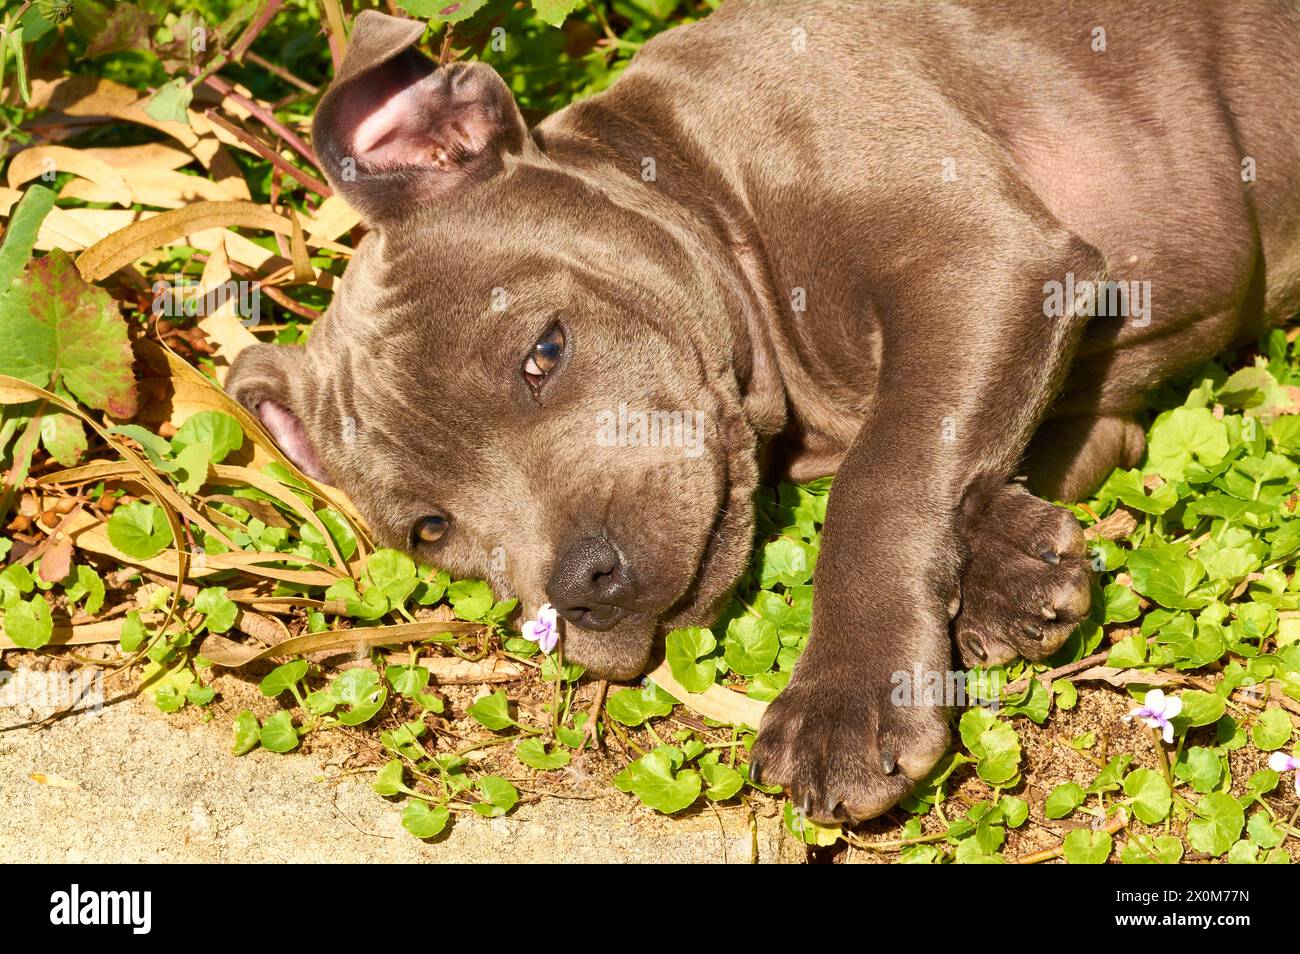 A close-up of a playful male Blue English Staffordshire Bull Terrier puppy lying in a garden bed with a flower near his nose and paws in front. Stock Photo